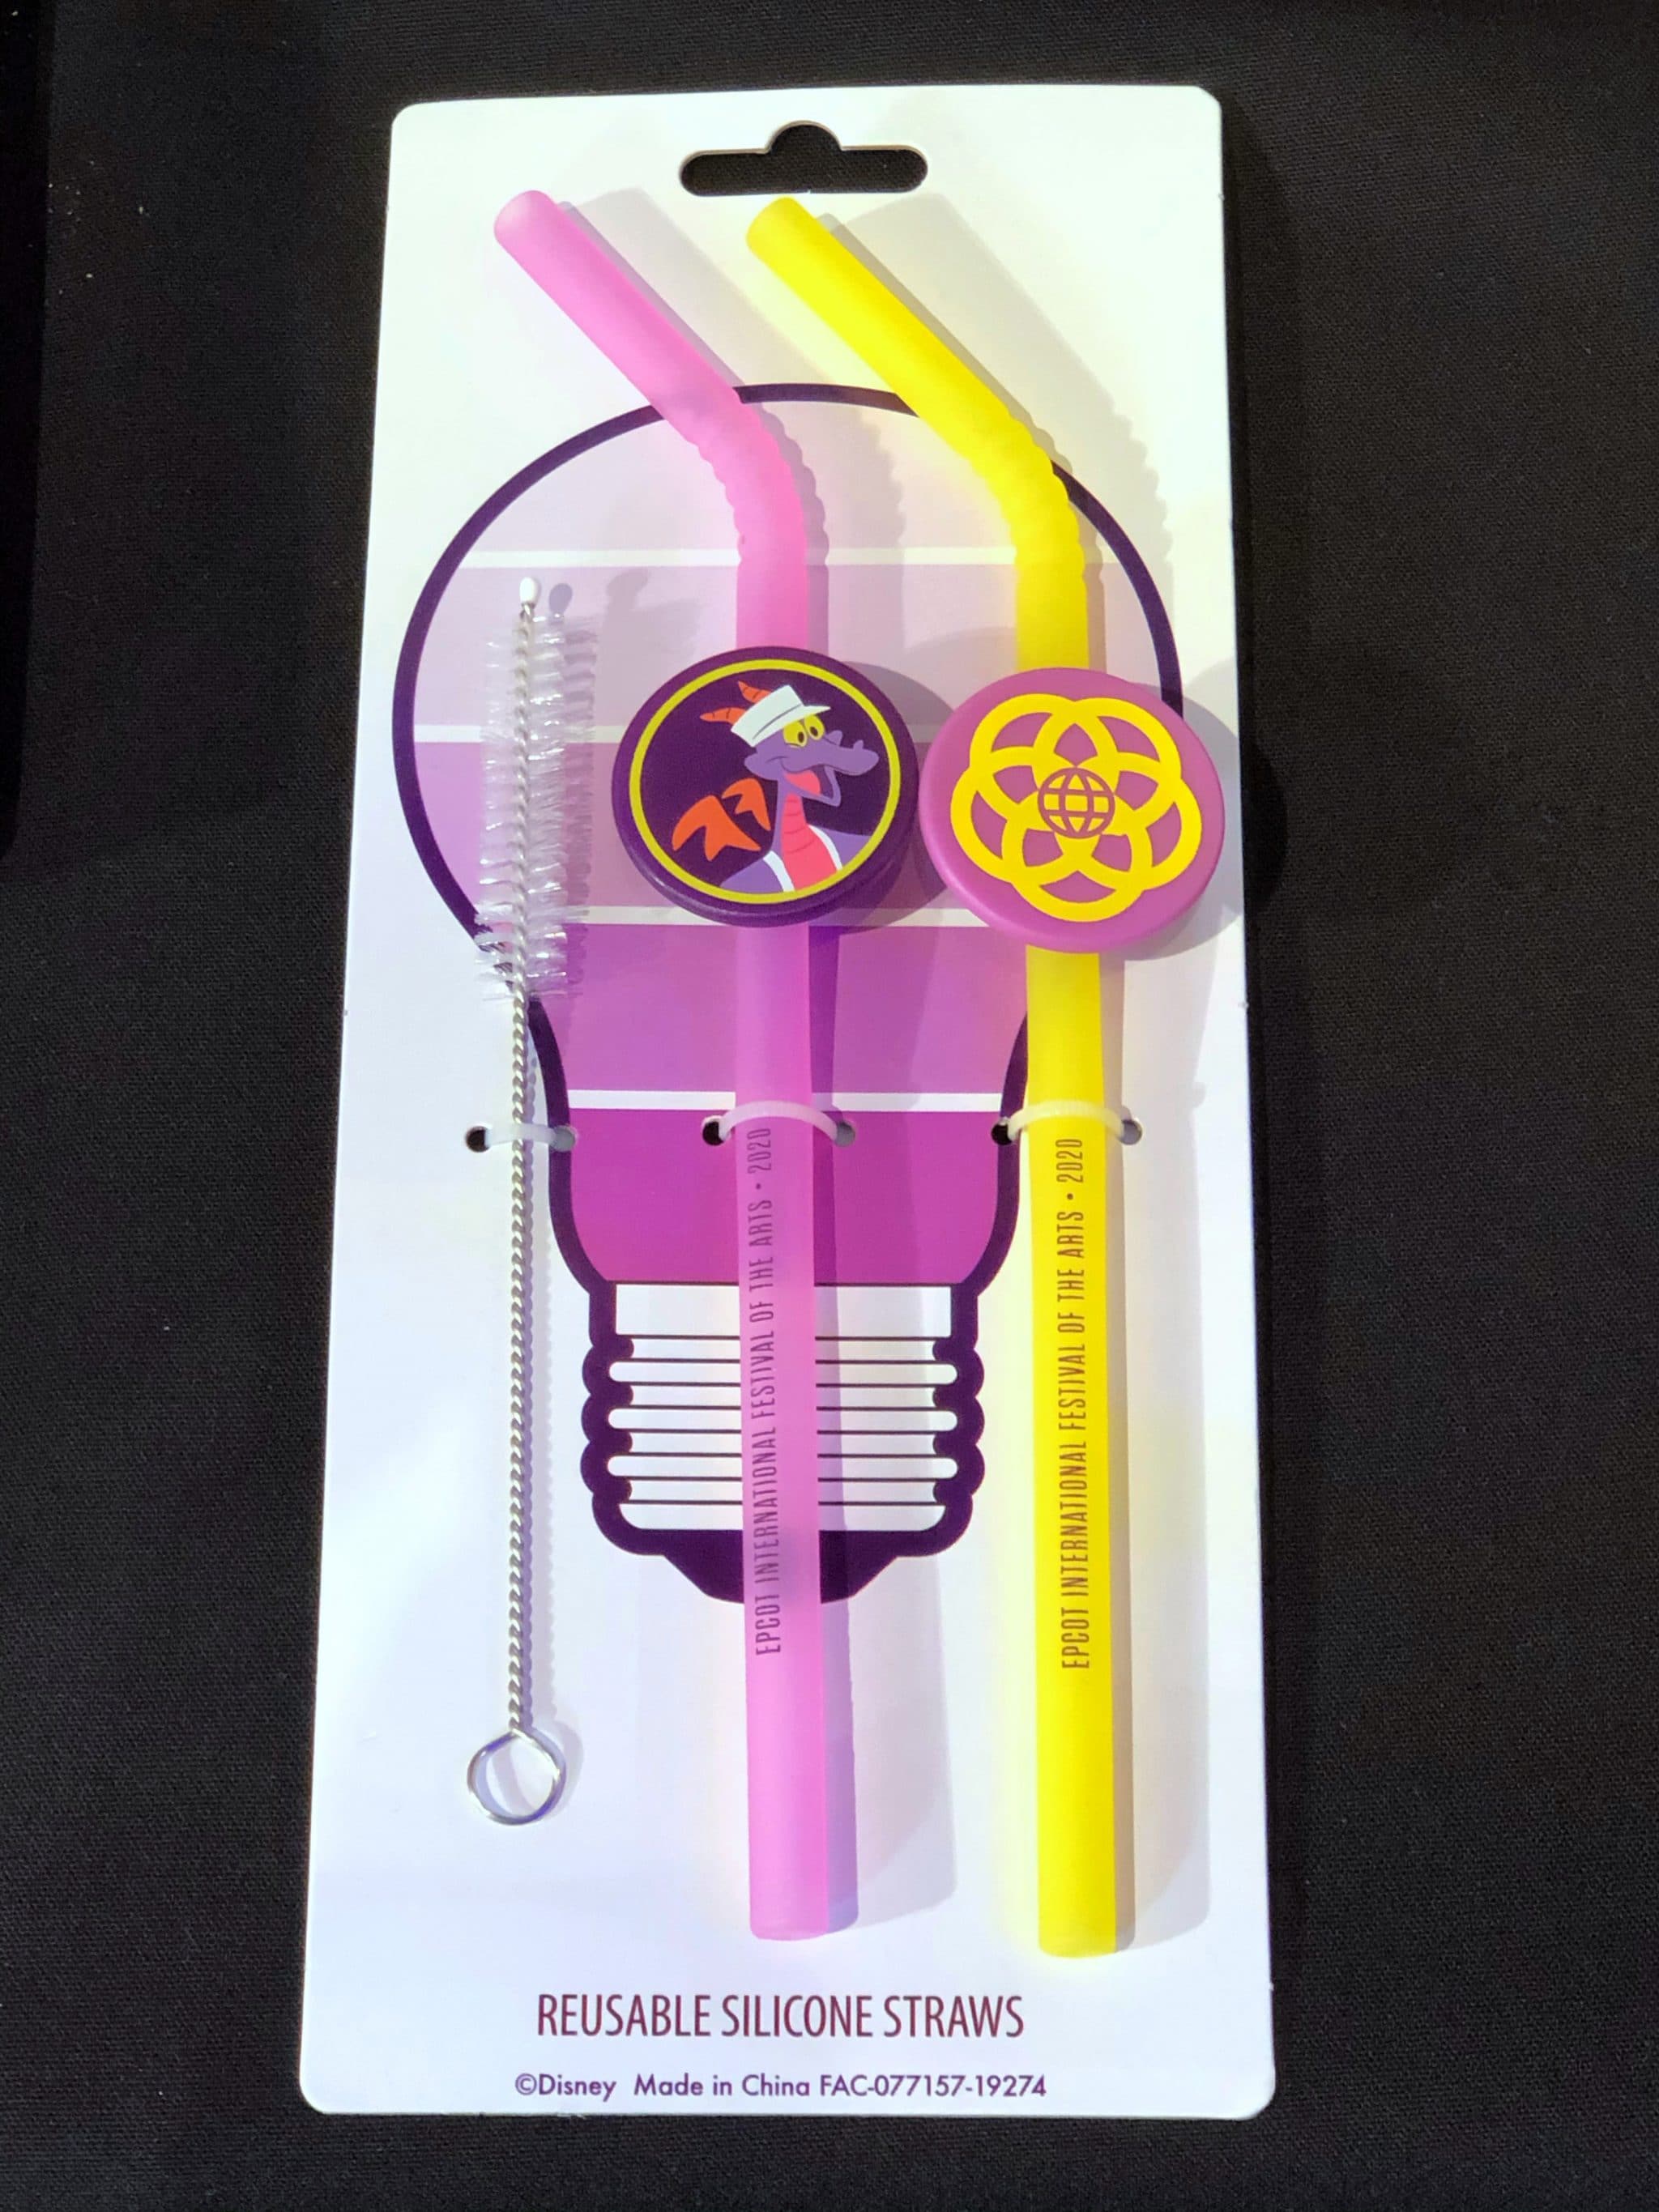 Epcot International Festival of the Arts Reusable Silicone Straws